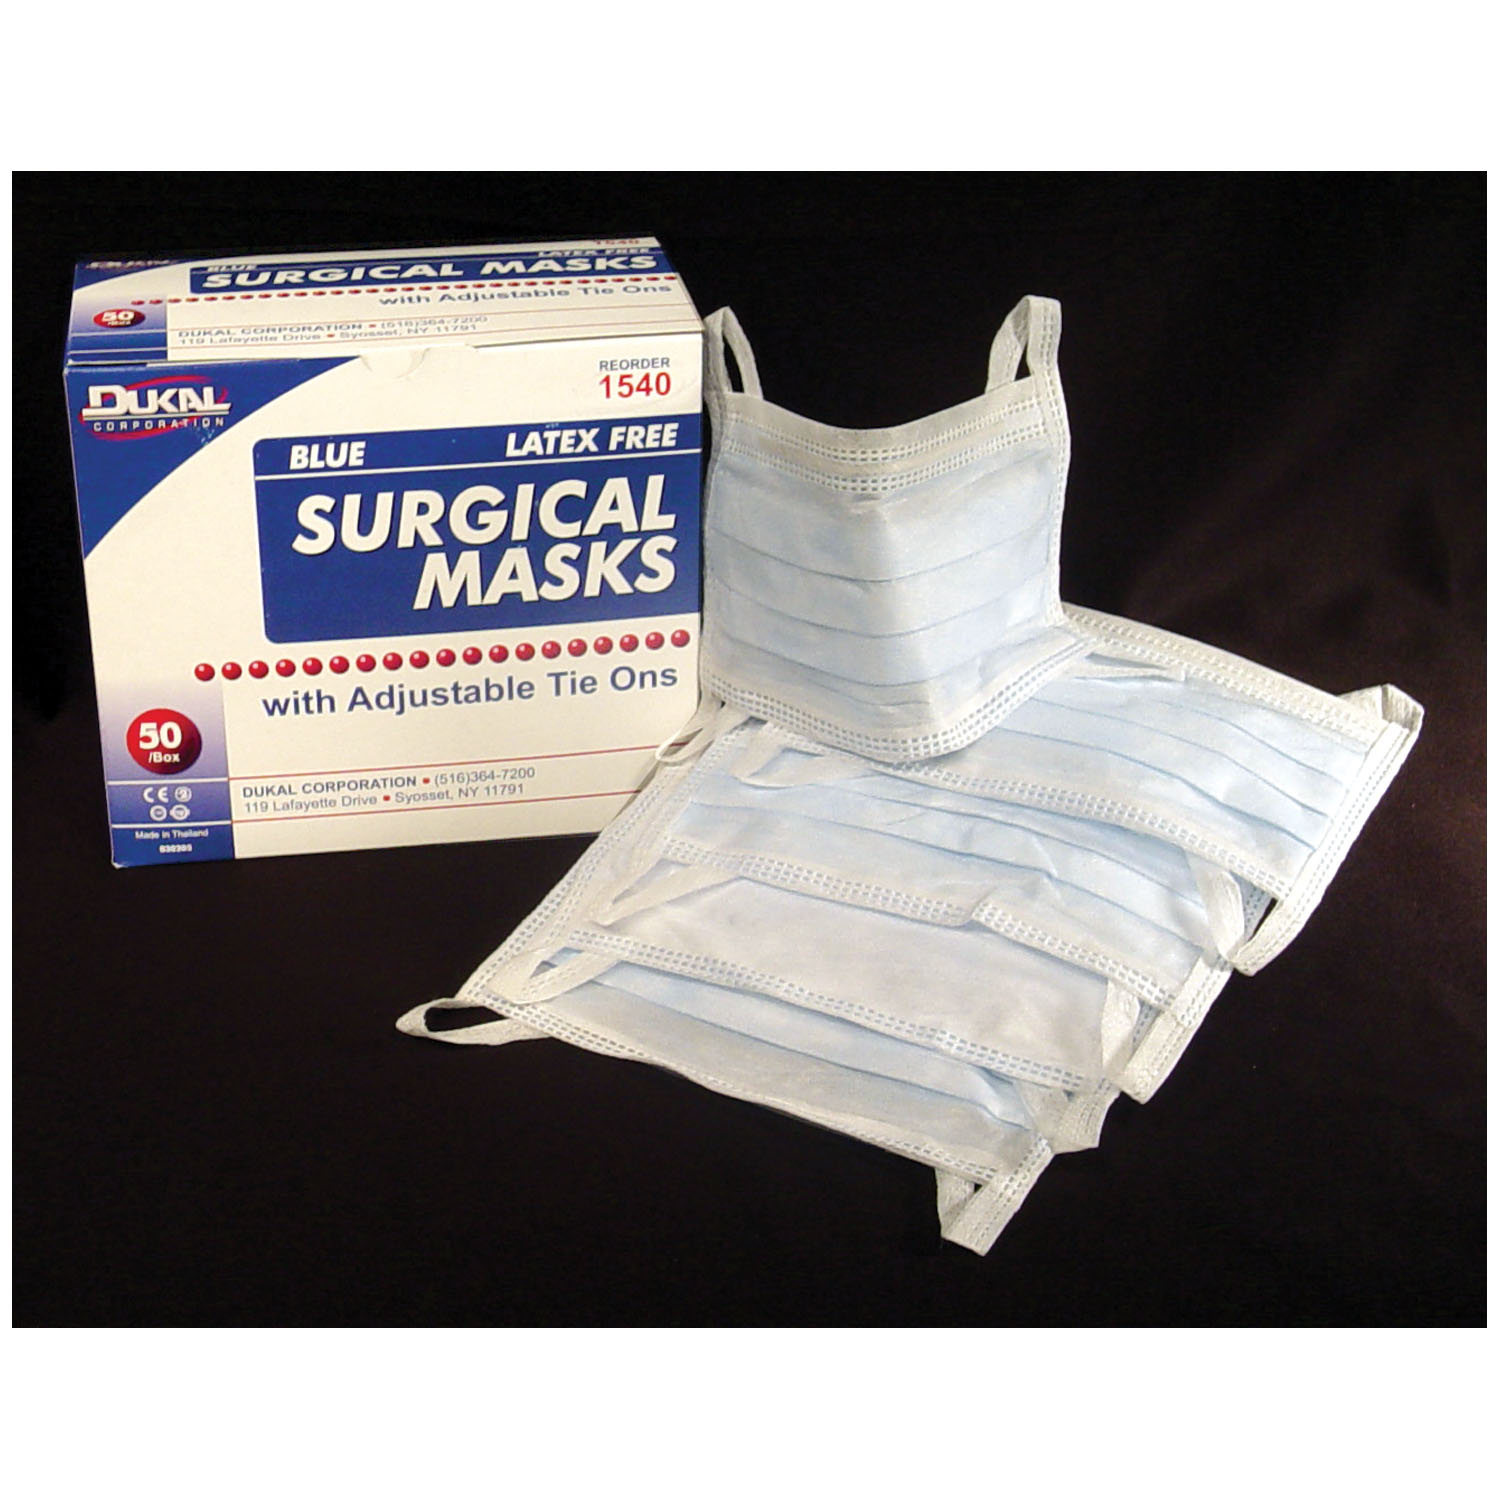 DUKAL SURGICAL FACE MASKS : 1540 BX              $11.04 Stocked